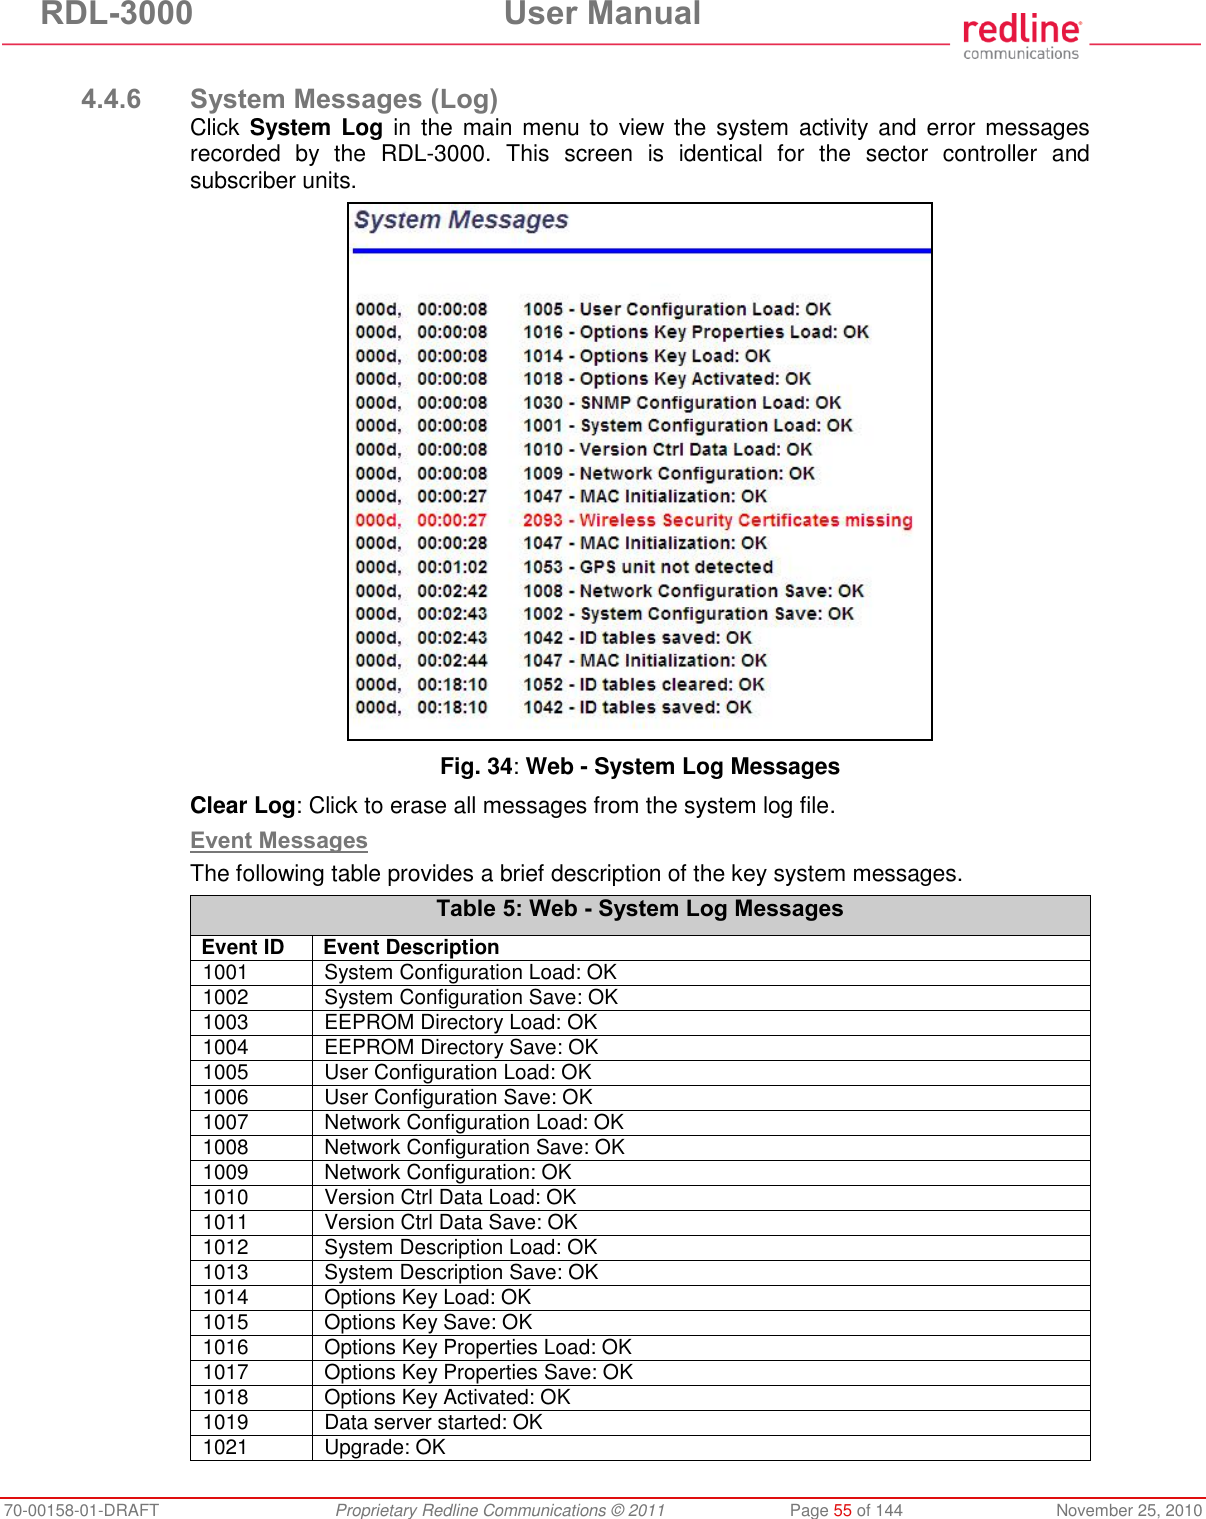 RDL-3000  User Manual 70-00158-01-DRAFT  Proprietary Redline Communications © 2011  Page 55 of 144  November 25, 2010  4.4.6 System Messages (Log) Click System Log  in  the main menu to  view the  system  activity and  error messages recorded  by  the  RDL-3000.  This  screen  is  identical  for  the  sector  controller  and subscriber units.   Fig. 34: Web - System Log Messages Clear Log: Click to erase all messages from the system log file. Event Messages The following table provides a brief description of the key system messages. Table 5: Web - System Log Messages Event ID Event Description 1001  System Configuration Load: OK 1002  System Configuration Save: OK 1003  EEPROM Directory Load: OK 1004  EEPROM Directory Save: OK 1005  User Configuration Load: OK 1006  User Configuration Save: OK 1007  Network Configuration Load: OK 1008  Network Configuration Save: OK 1009  Network Configuration: OK 1010  Version Ctrl Data Load: OK 1011  Version Ctrl Data Save: OK 1012  System Description Load: OK 1013  System Description Save: OK 1014  Options Key Load: OK 1015  Options Key Save: OK 1016  Options Key Properties Load: OK 1017  Options Key Properties Save: OK 1018  Options Key Activated: OK 1019  Data server started: OK 1021  Upgrade: OK 